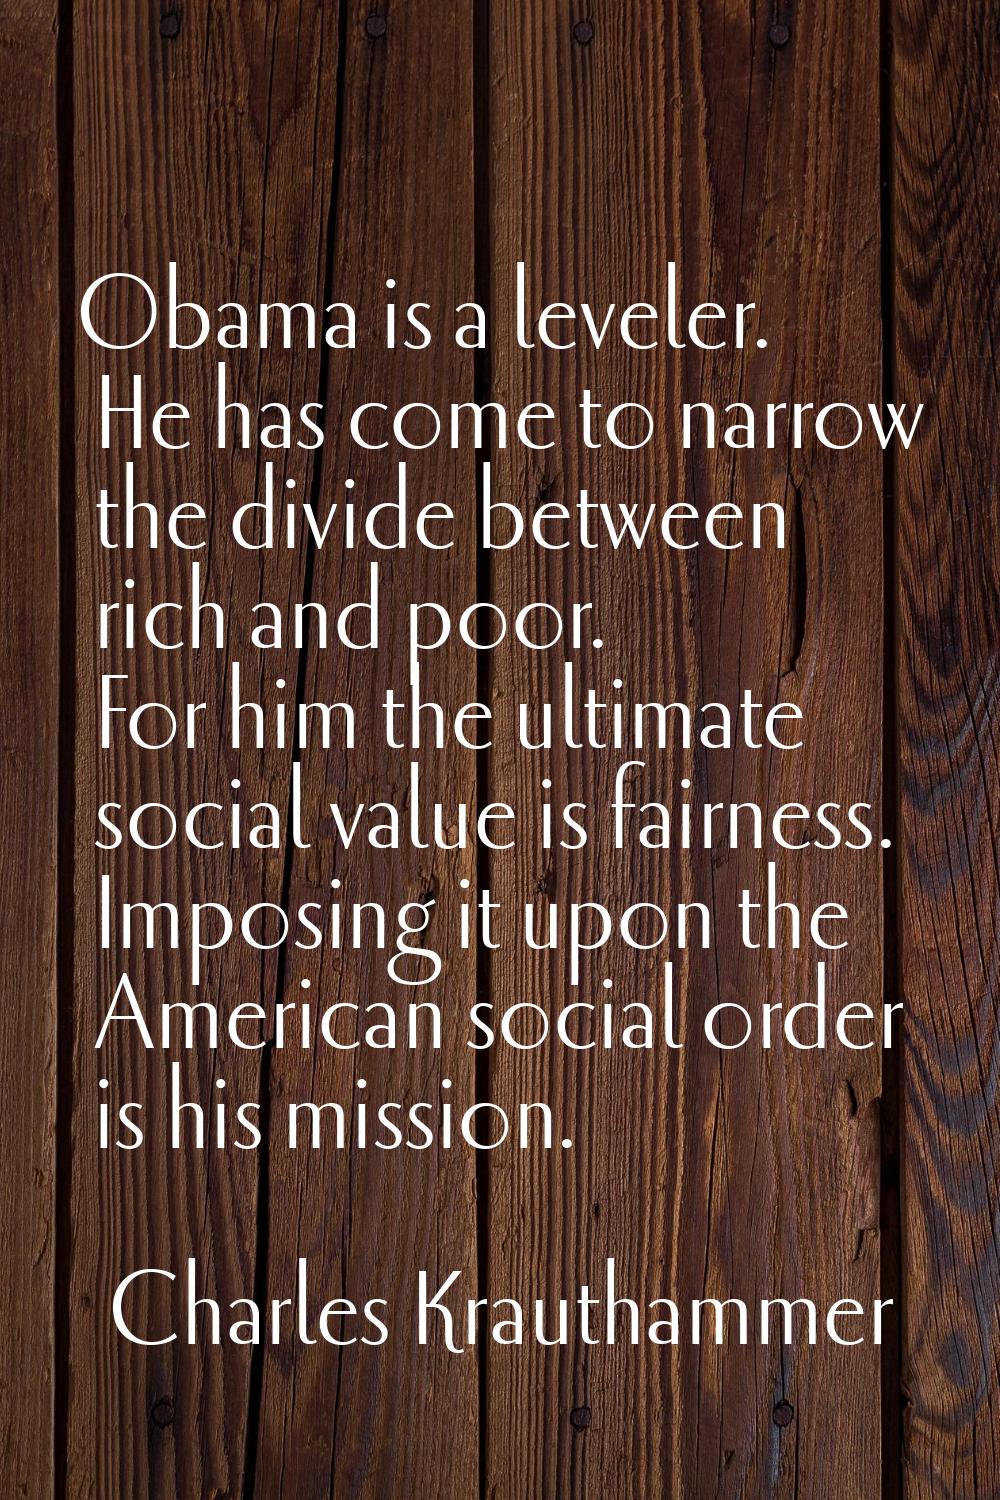 Obama is a leveler. He has come to narrow the divide between rich and poor. For him the ultimate so